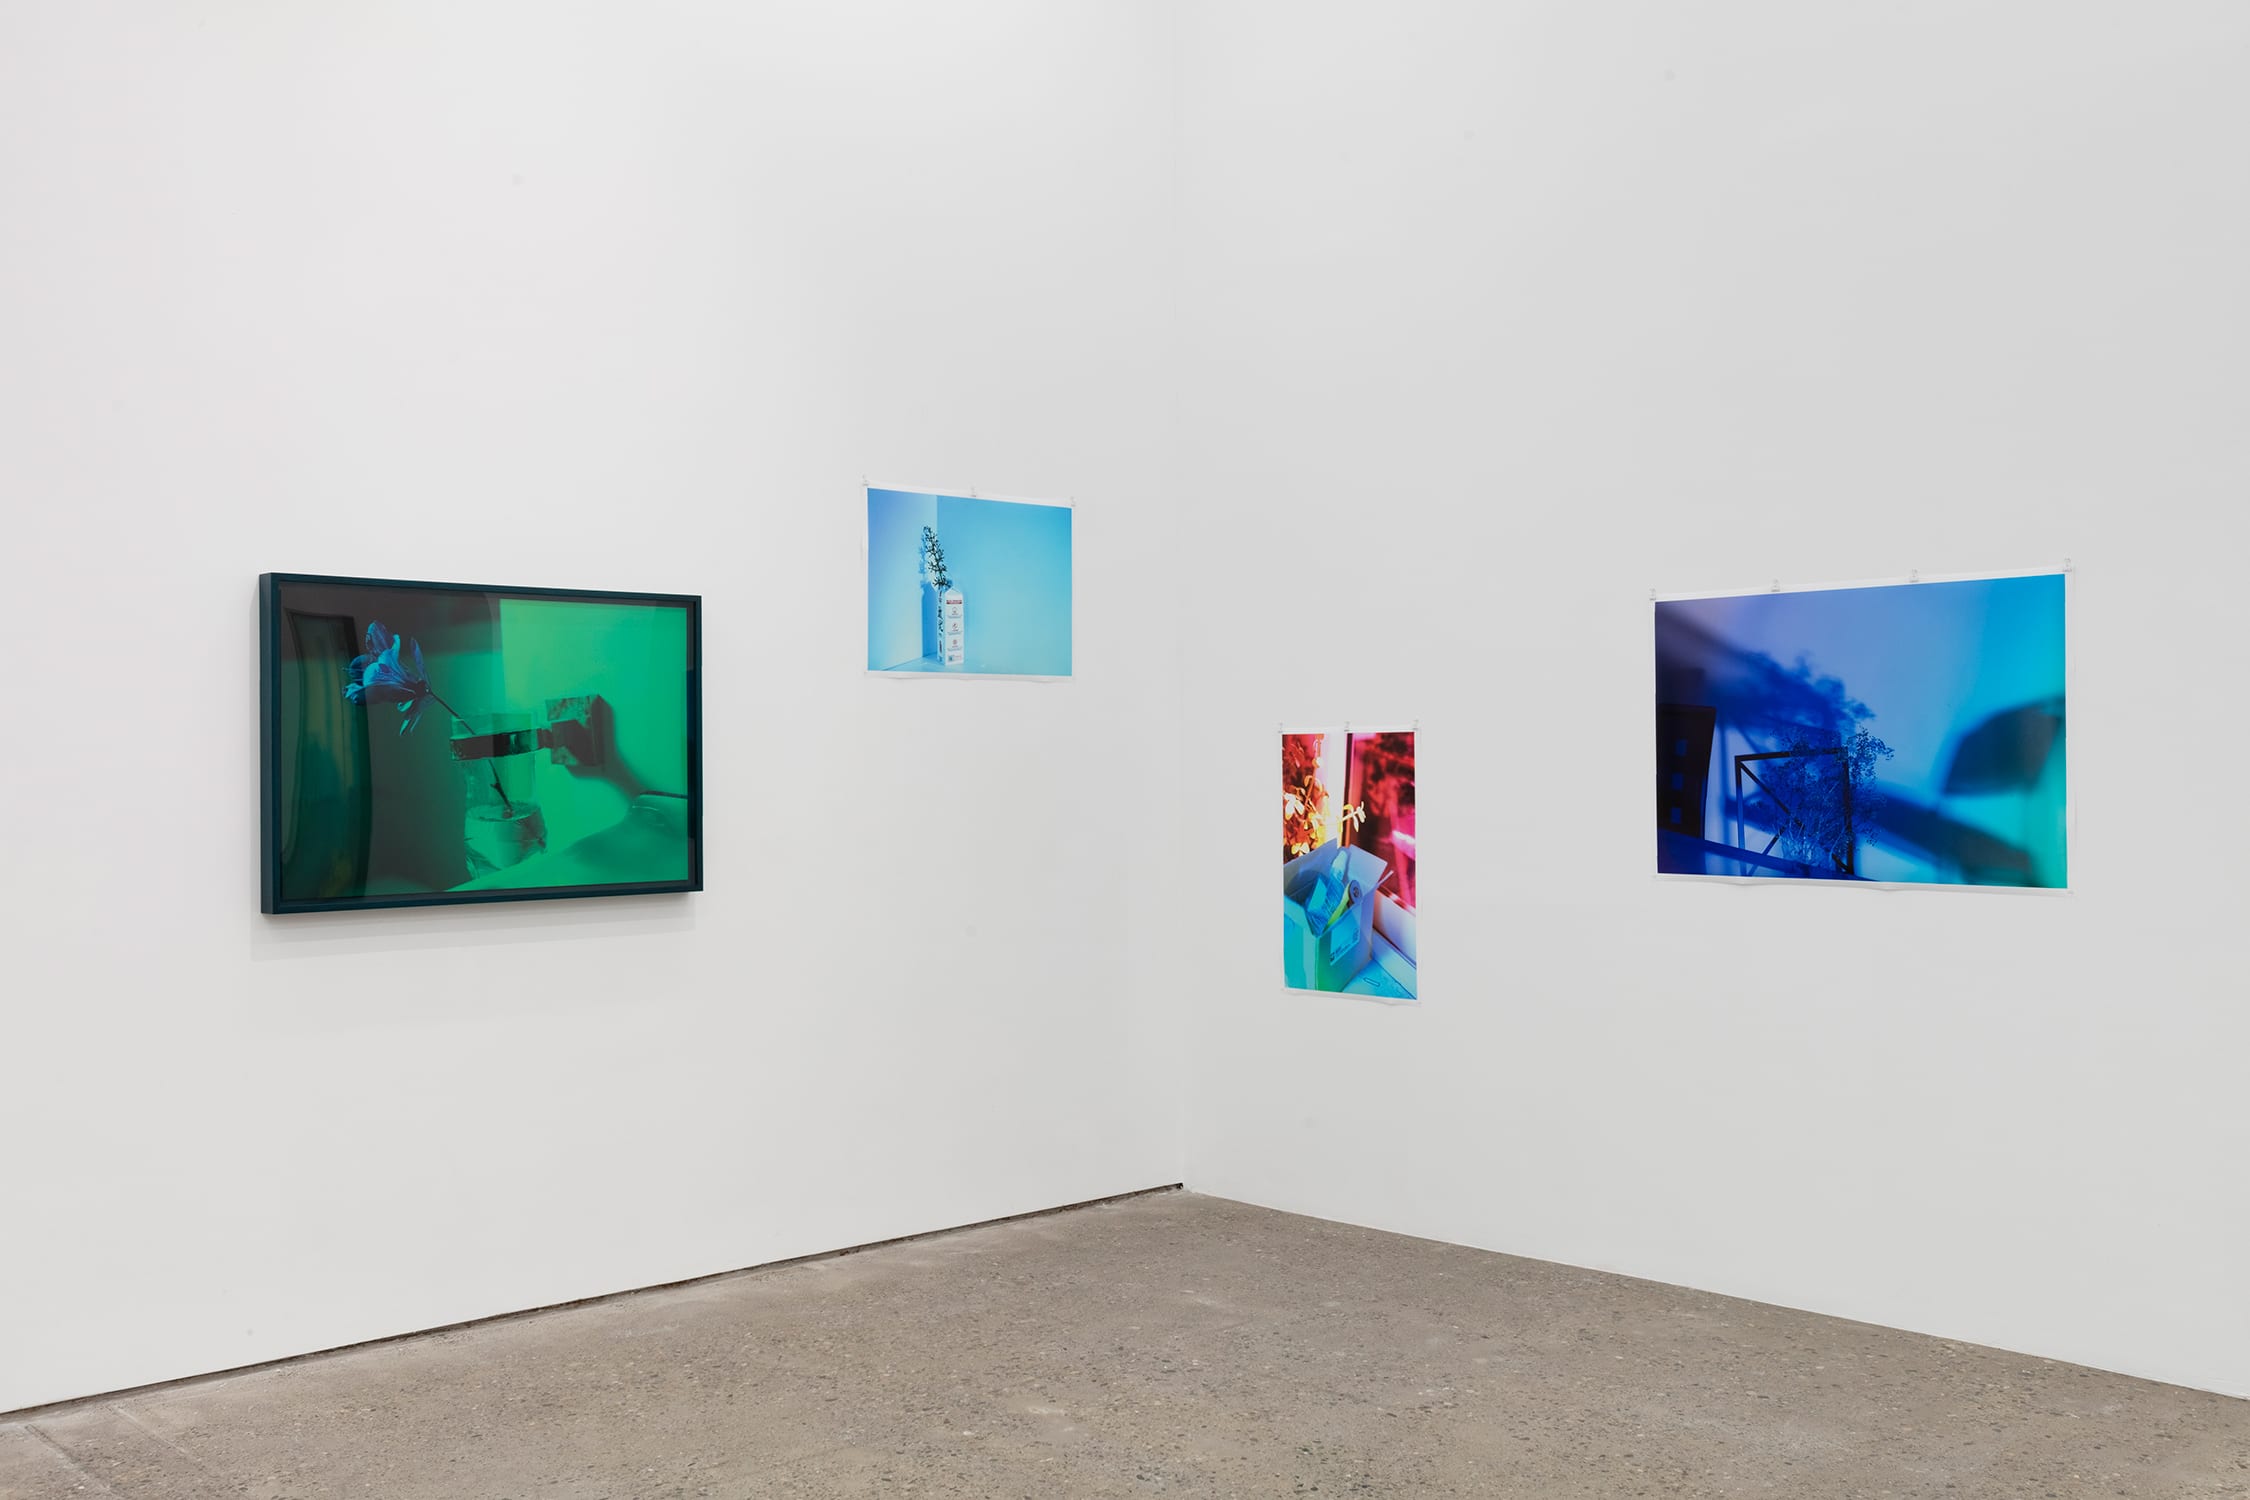 Installation view of ‘Hu Jieming: The Things 2020’, at Magician Space, Beijing, 2021. Courtesy of Magician Space, Beijing.